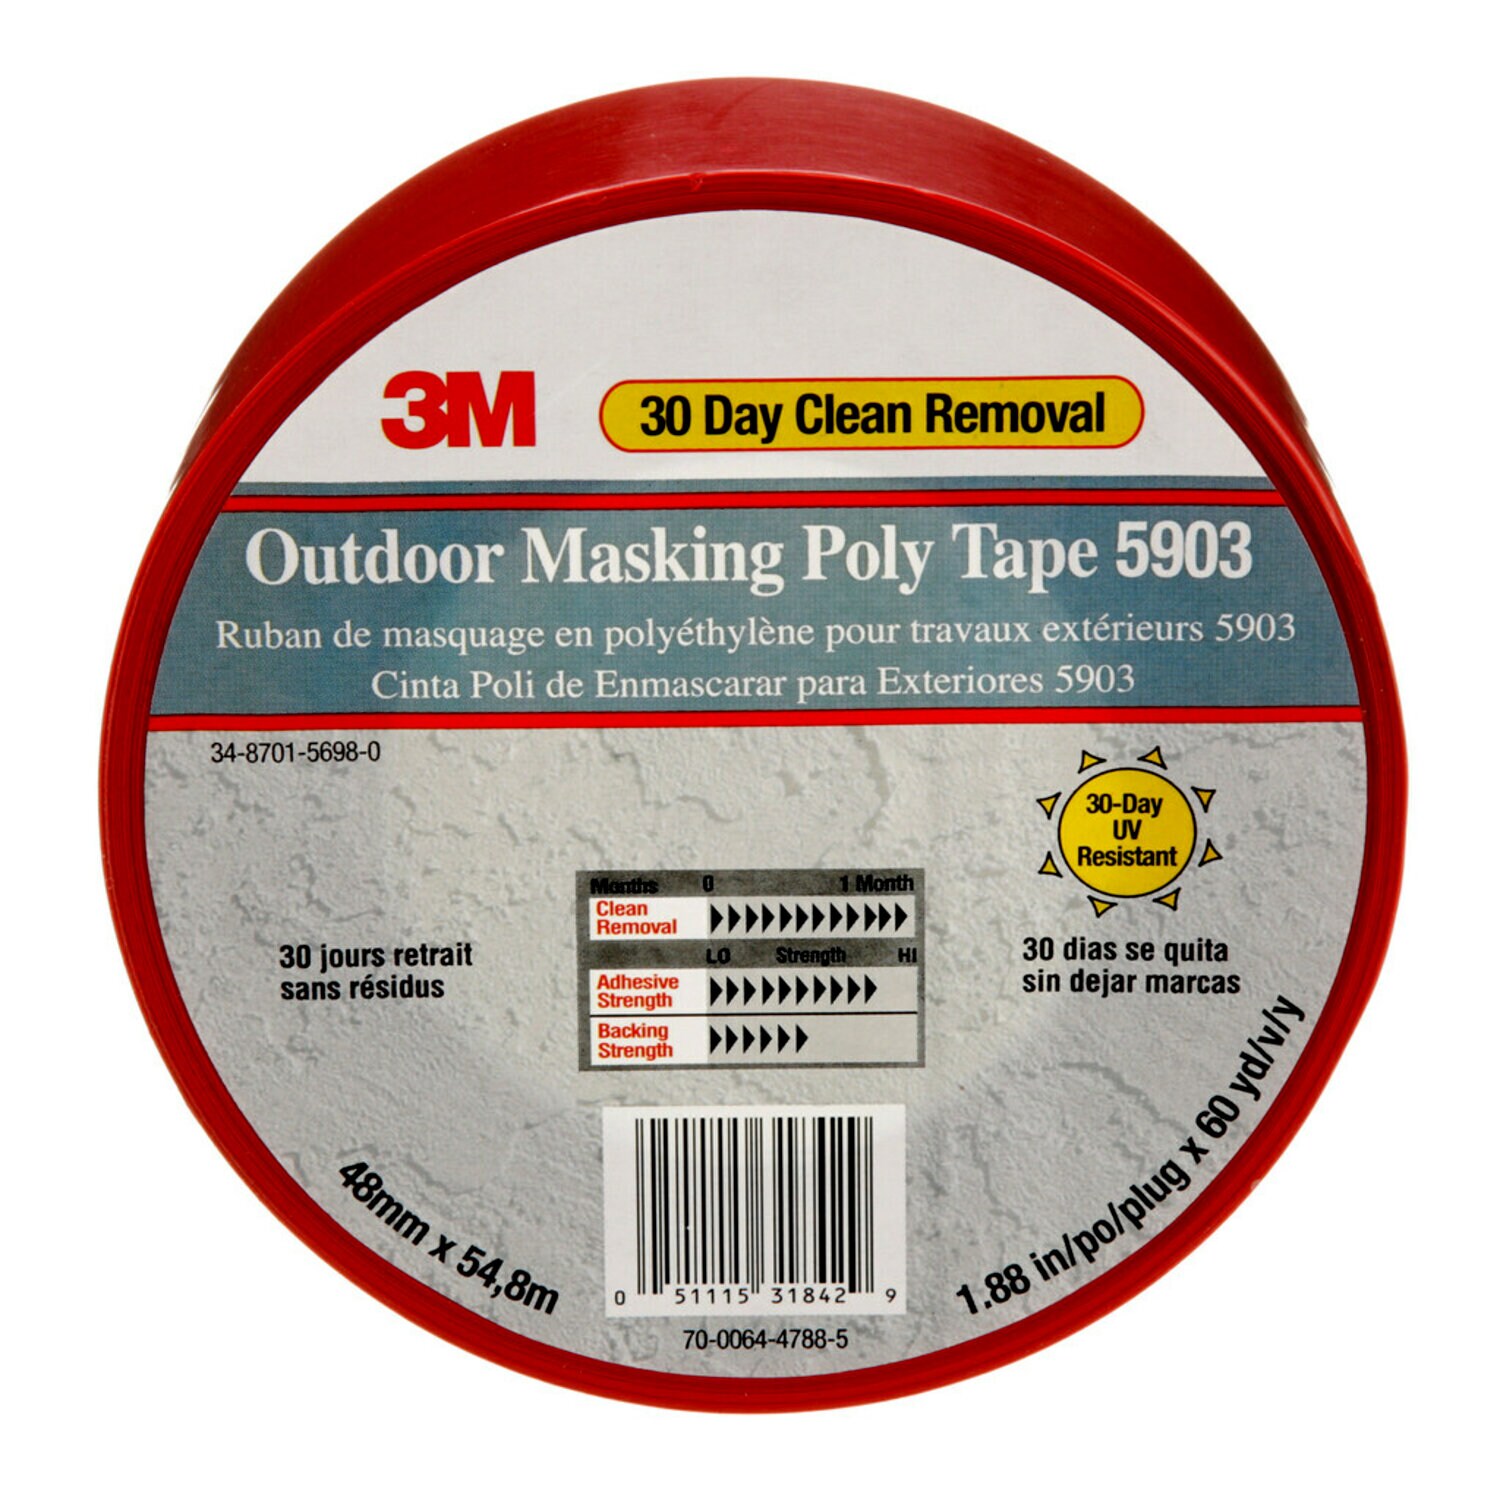 7000049309 - 3M Outdoor Masking Poly Tape 5903, Red, 48 mm x 54.8 m, 7.5 mil, 24
Roll/Case, Individually Wrapped Conveniently Packaged